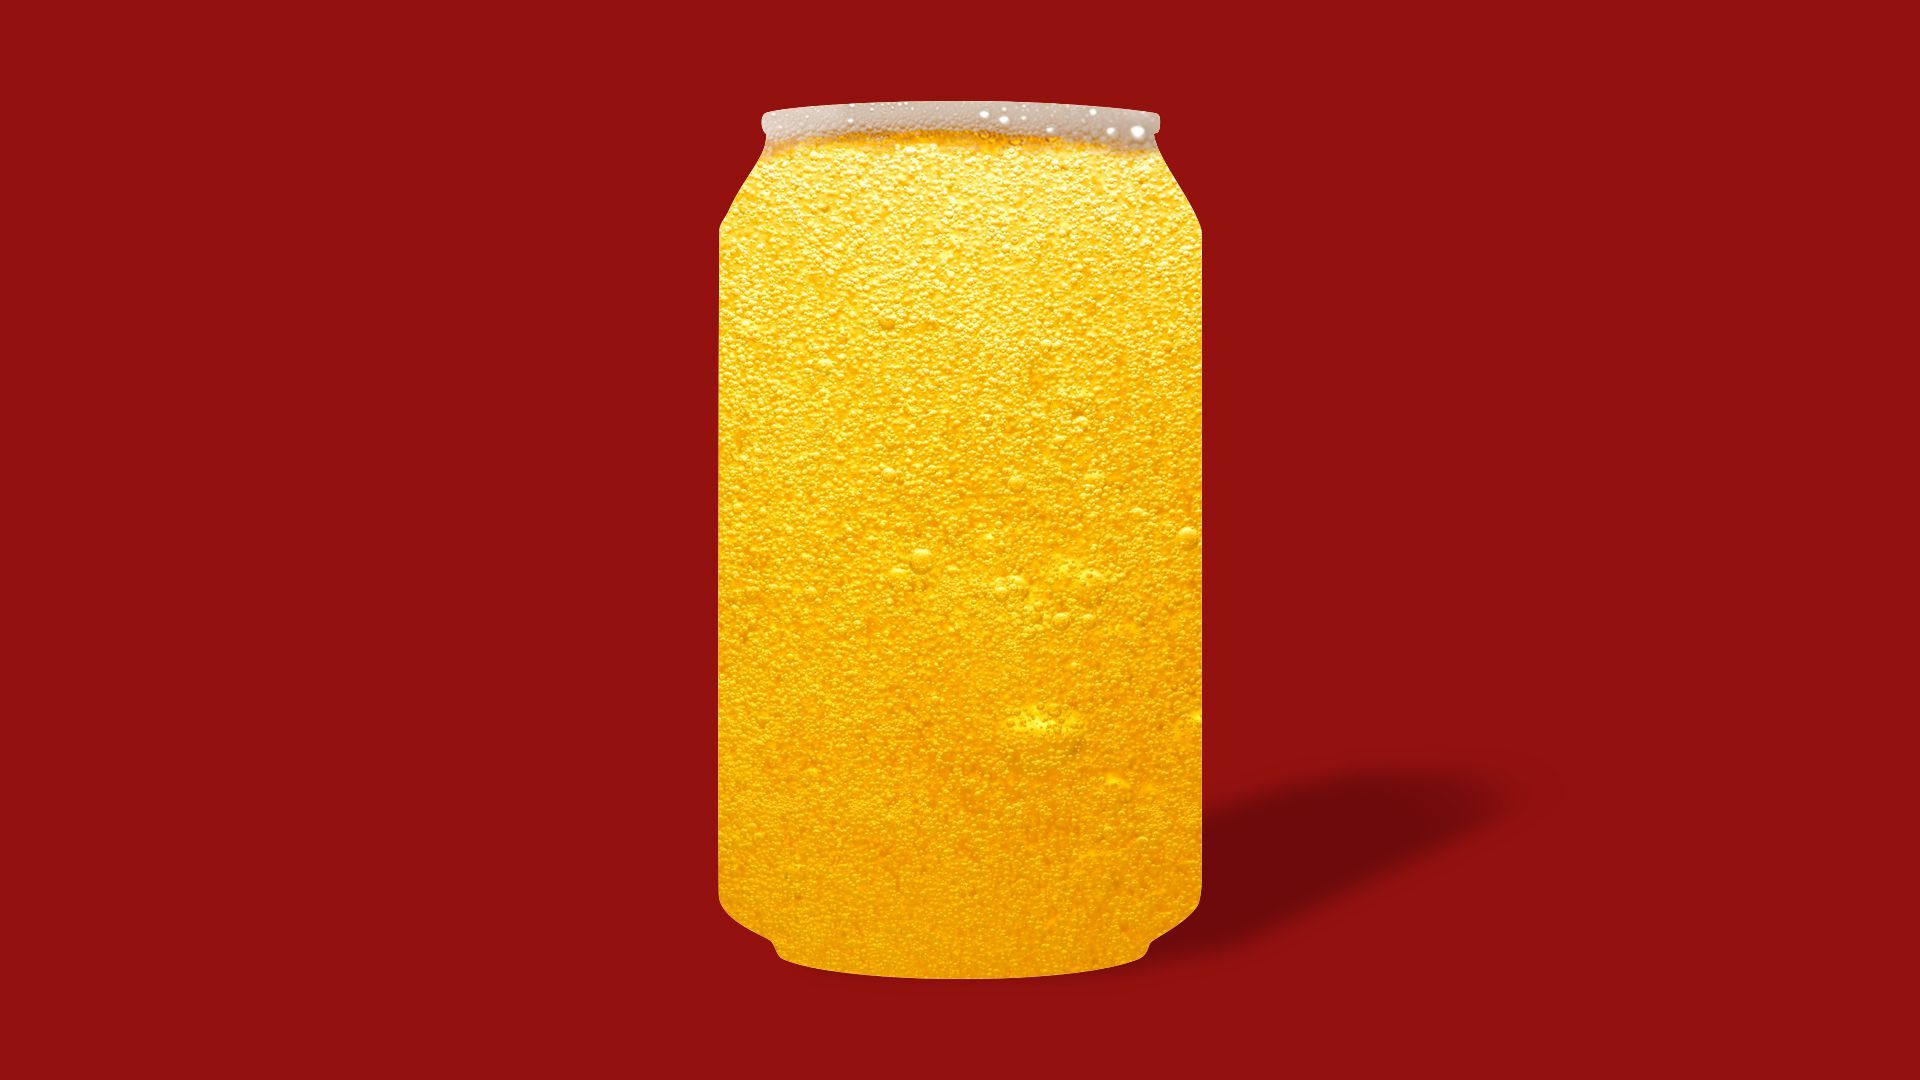 Illustration of beer in the shape of a beer can, but the aluminum can is missing.